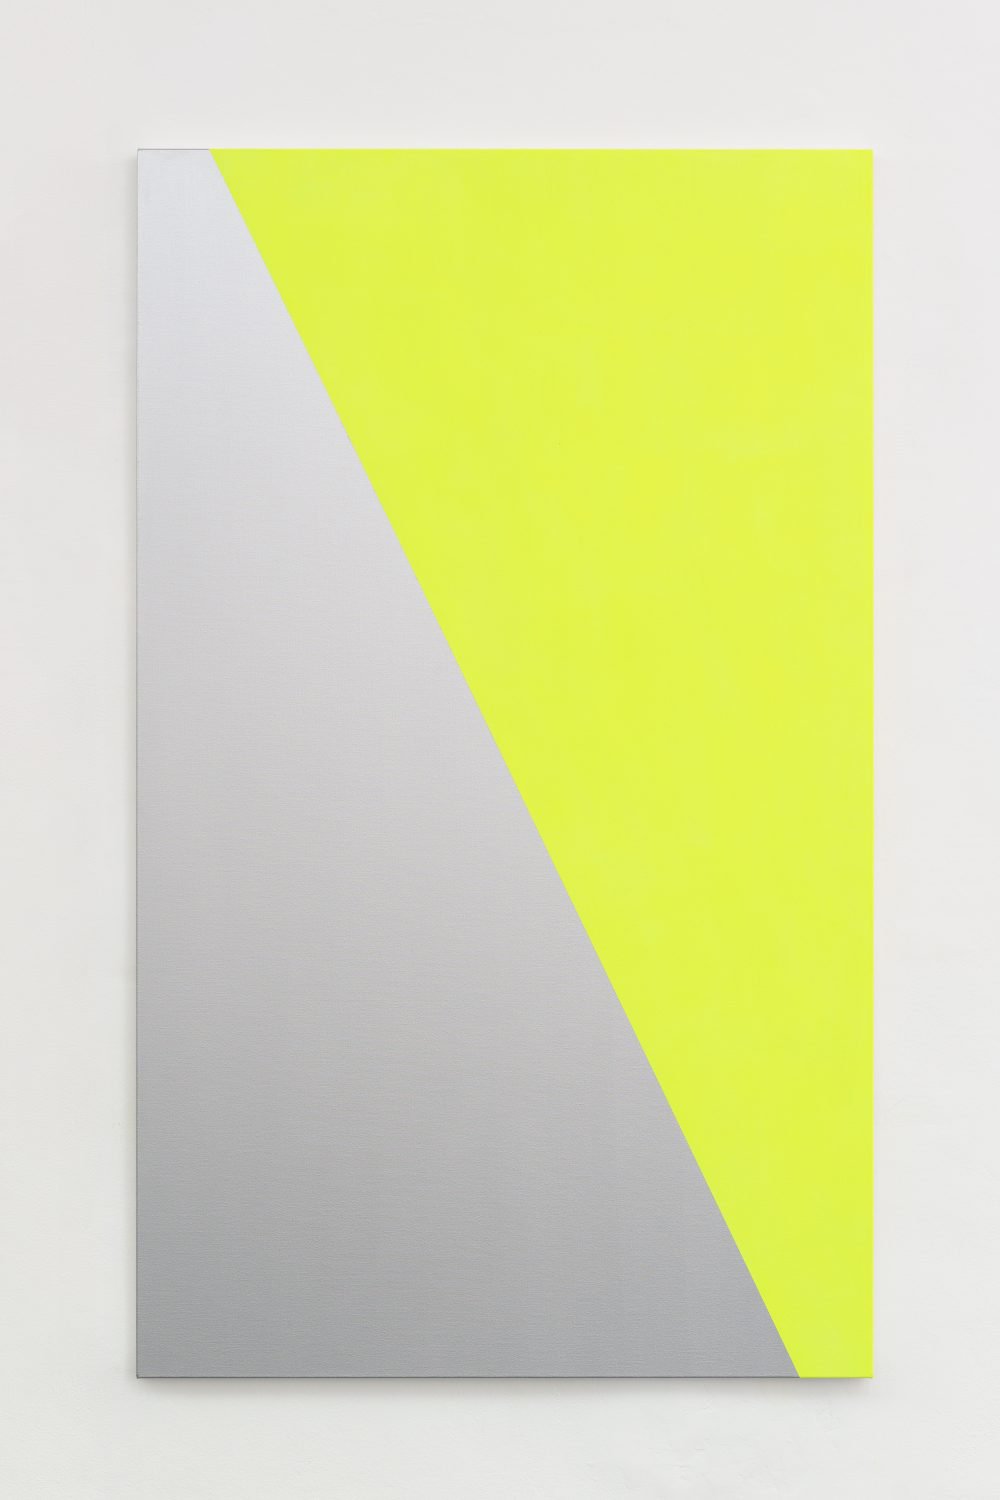 Nick OberthalerO.T., 2019Acrylic and gesso on linen200 x 120 cm